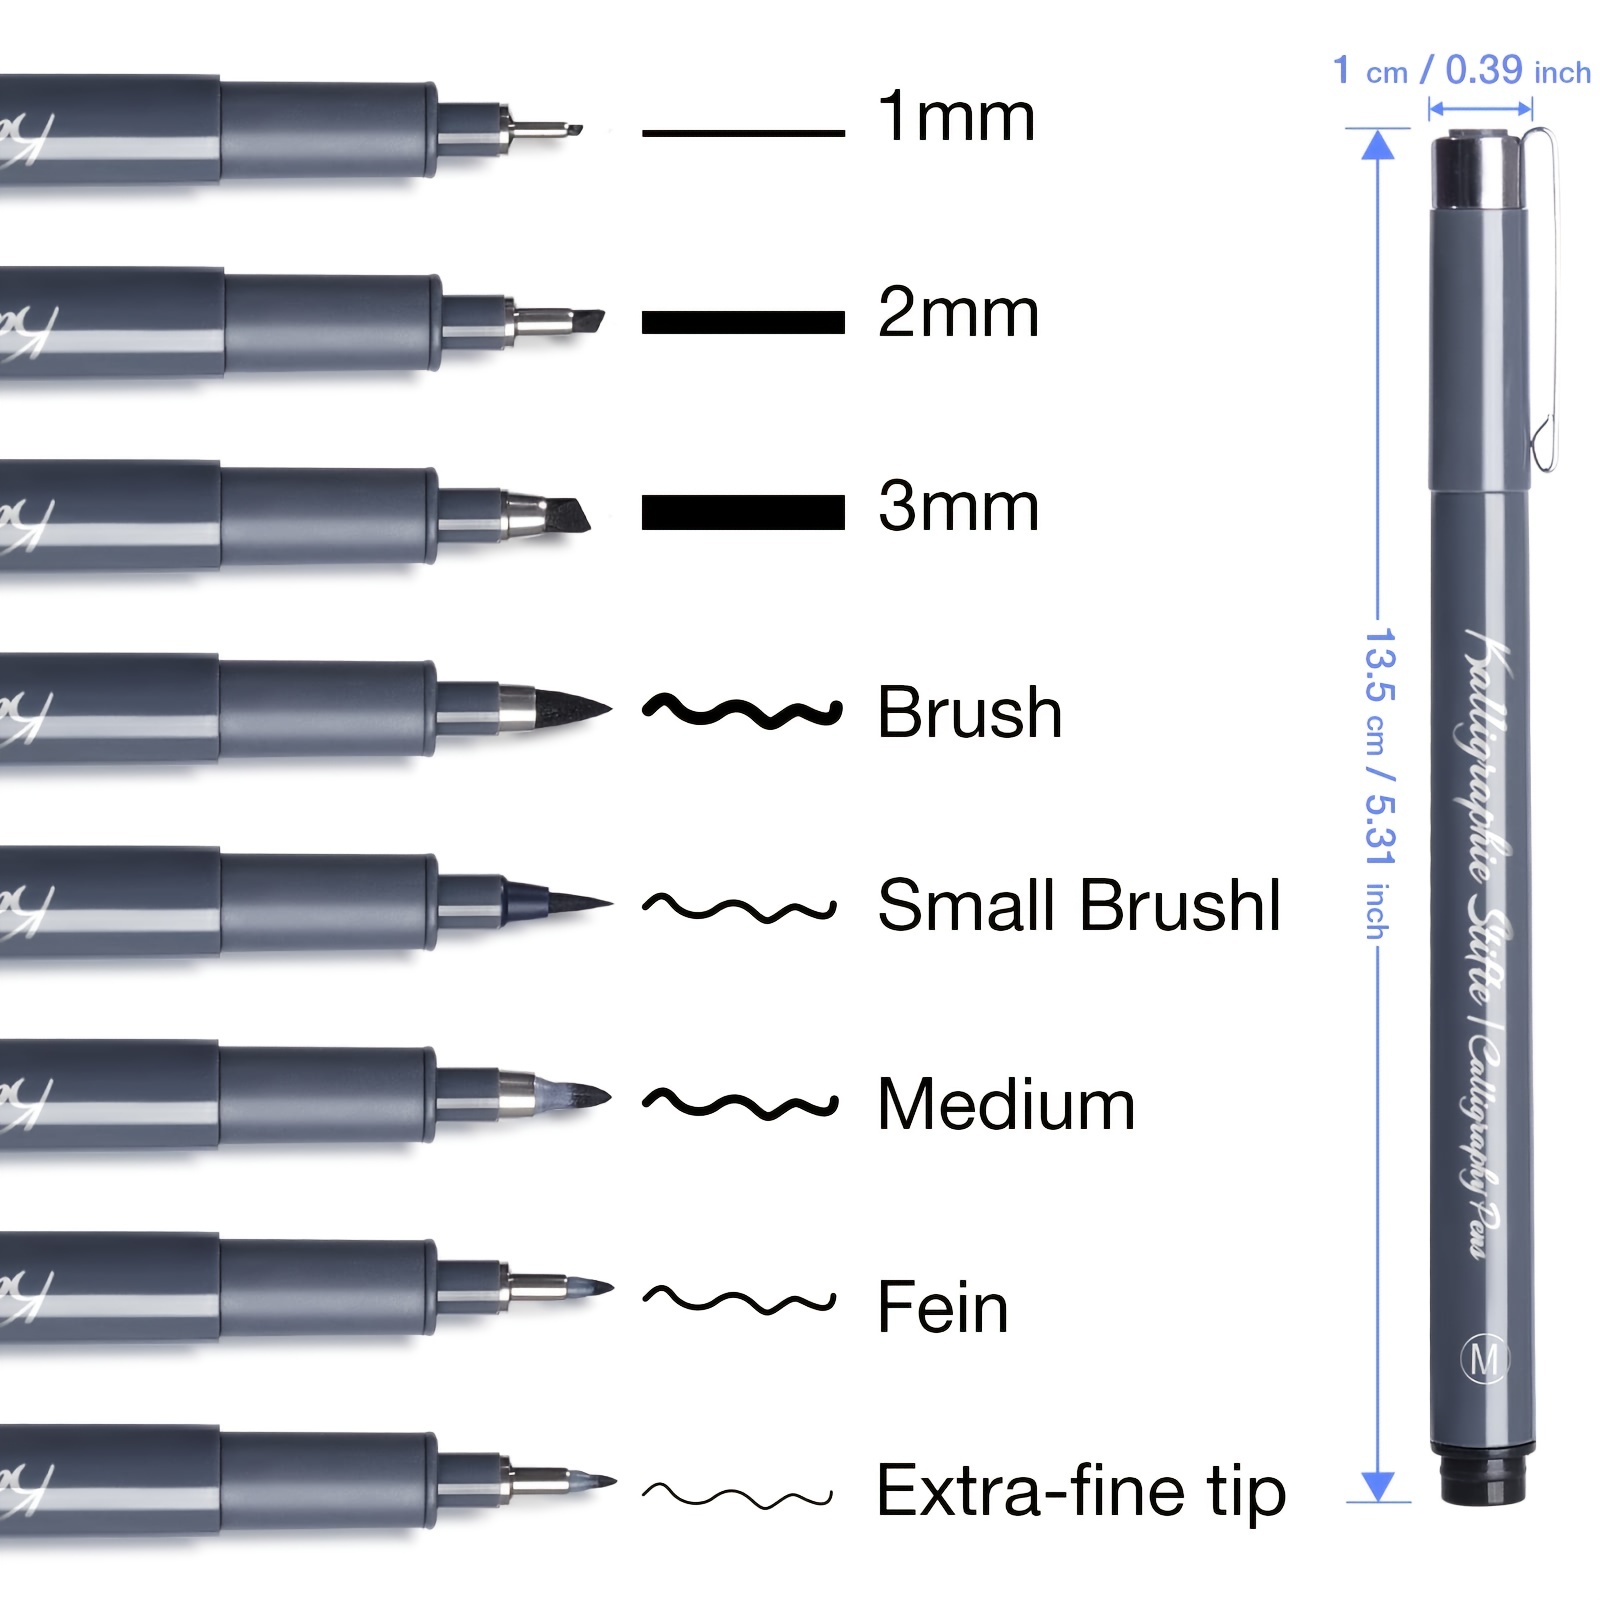 Calligraphy Pens,8 Size Calligraphy Pens for Writing,Brush Pens